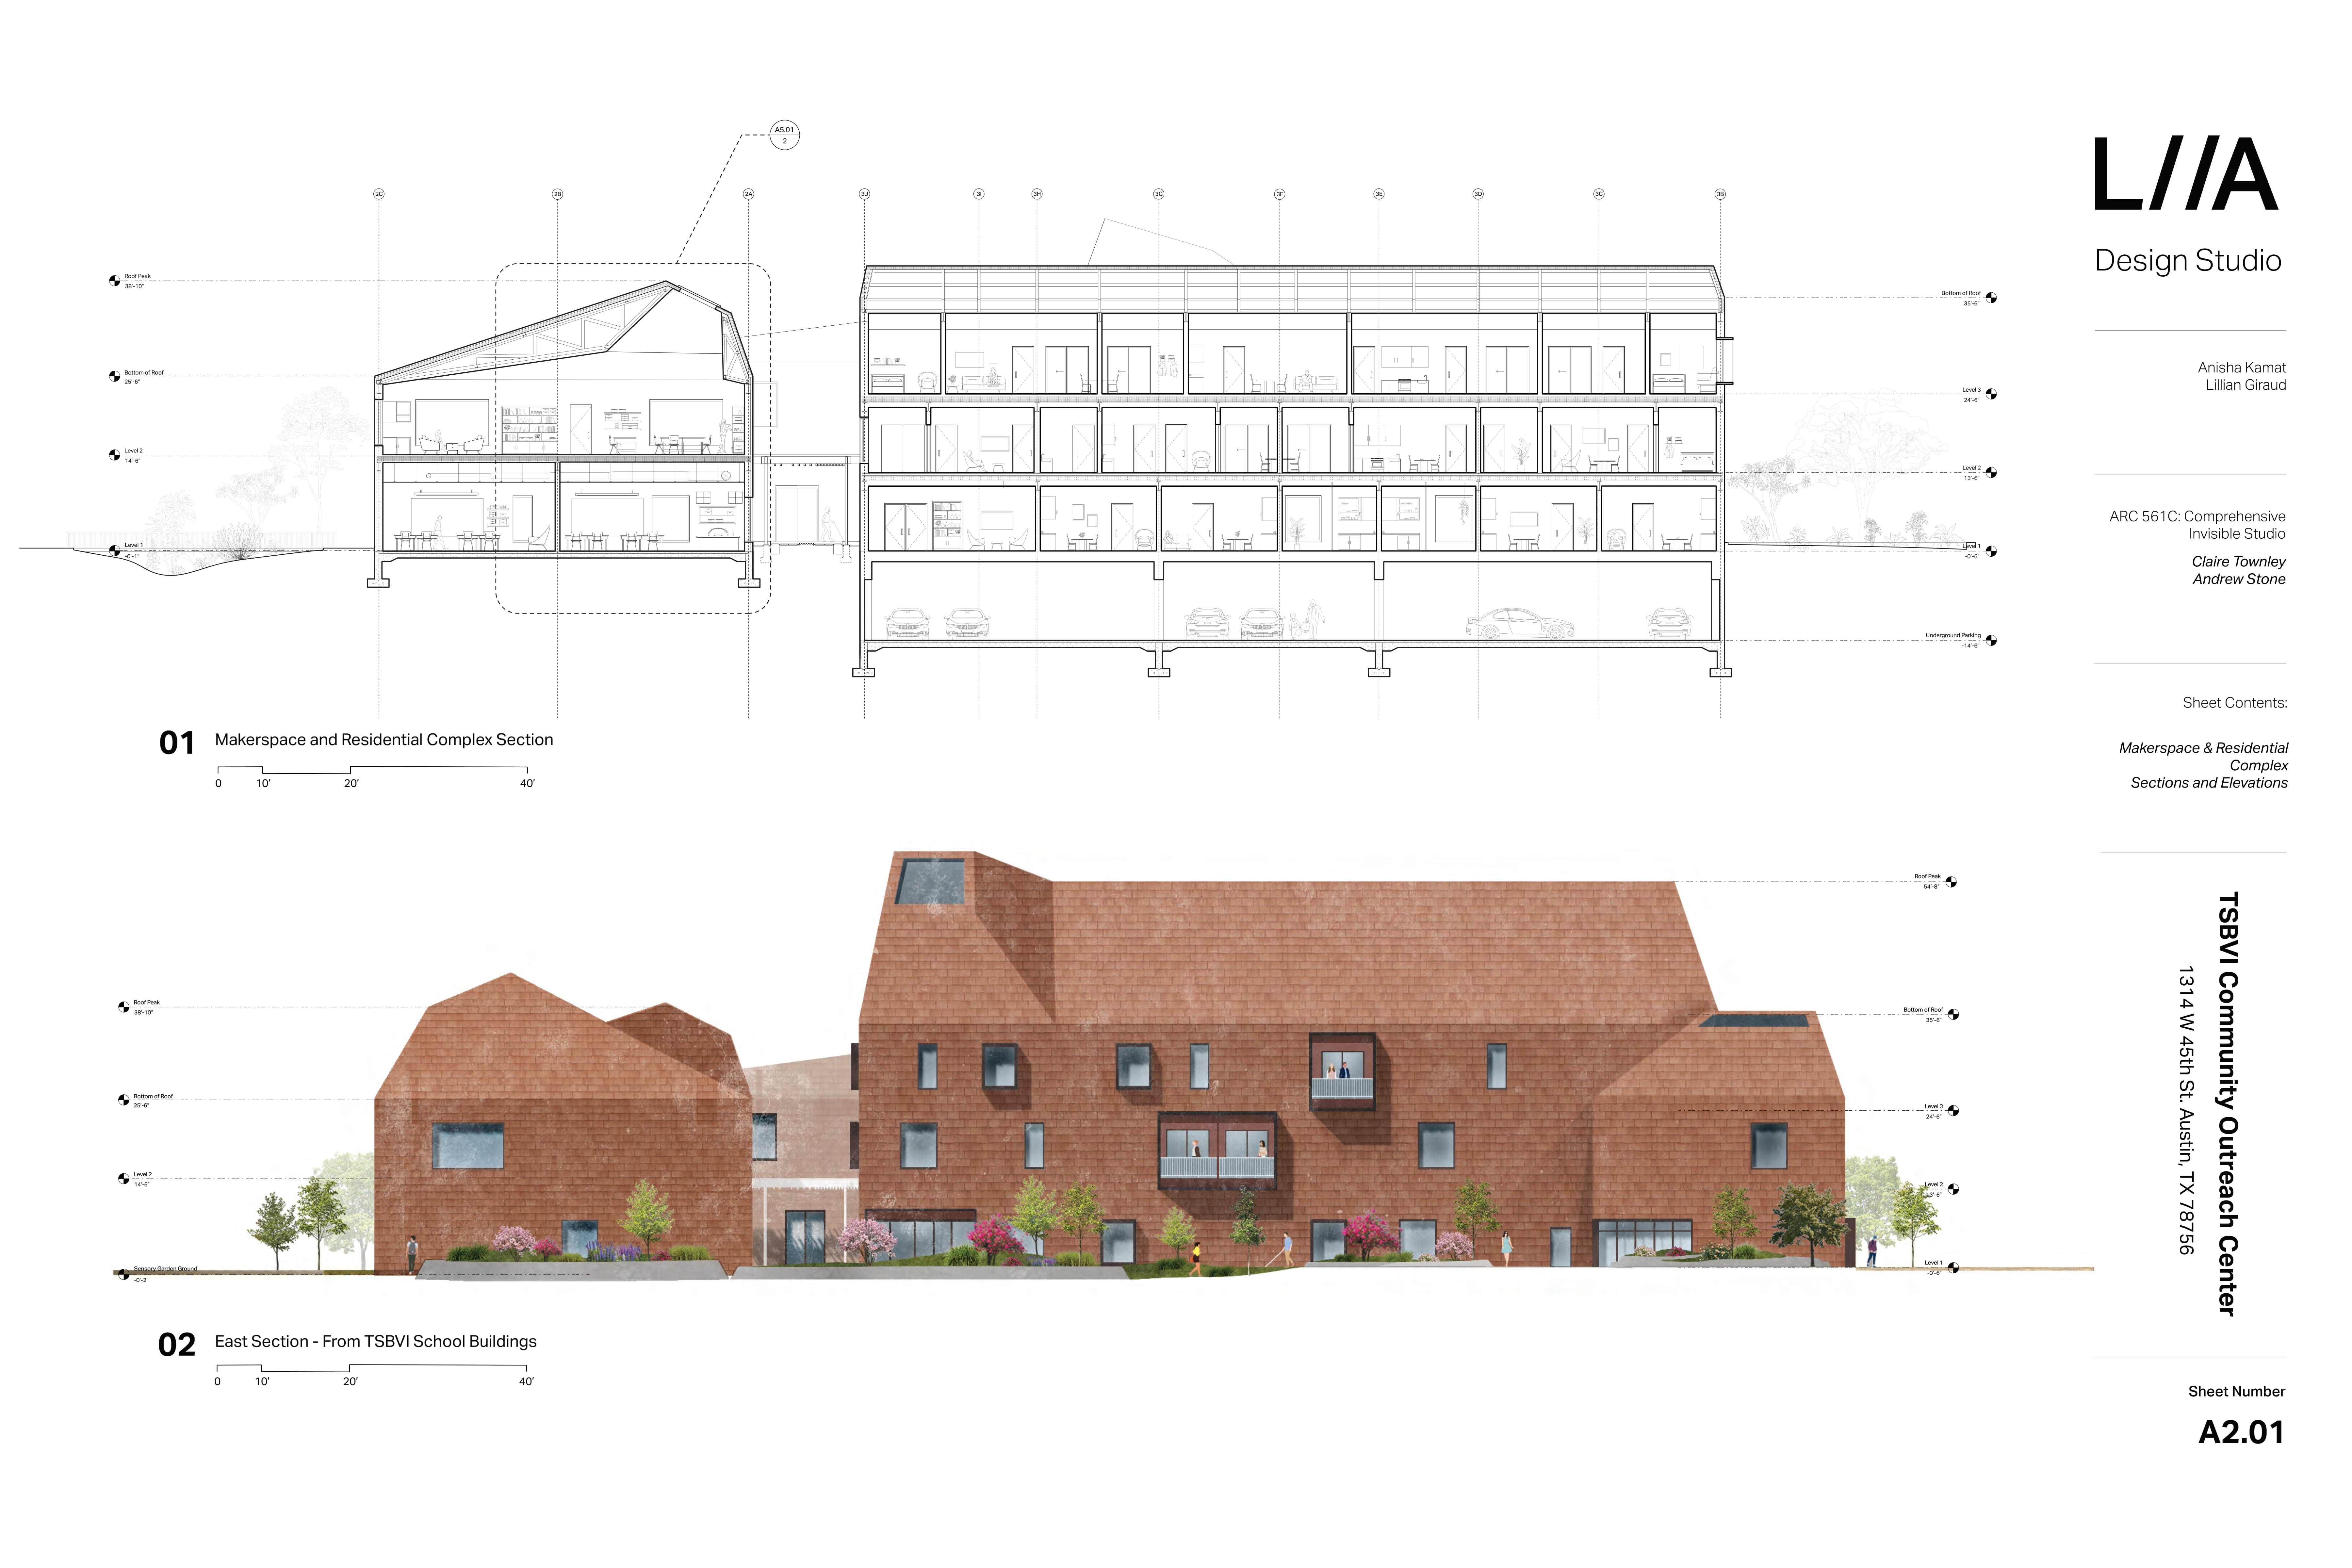 Section and elevations for Kamat and Giraud's makerspace and residential complex